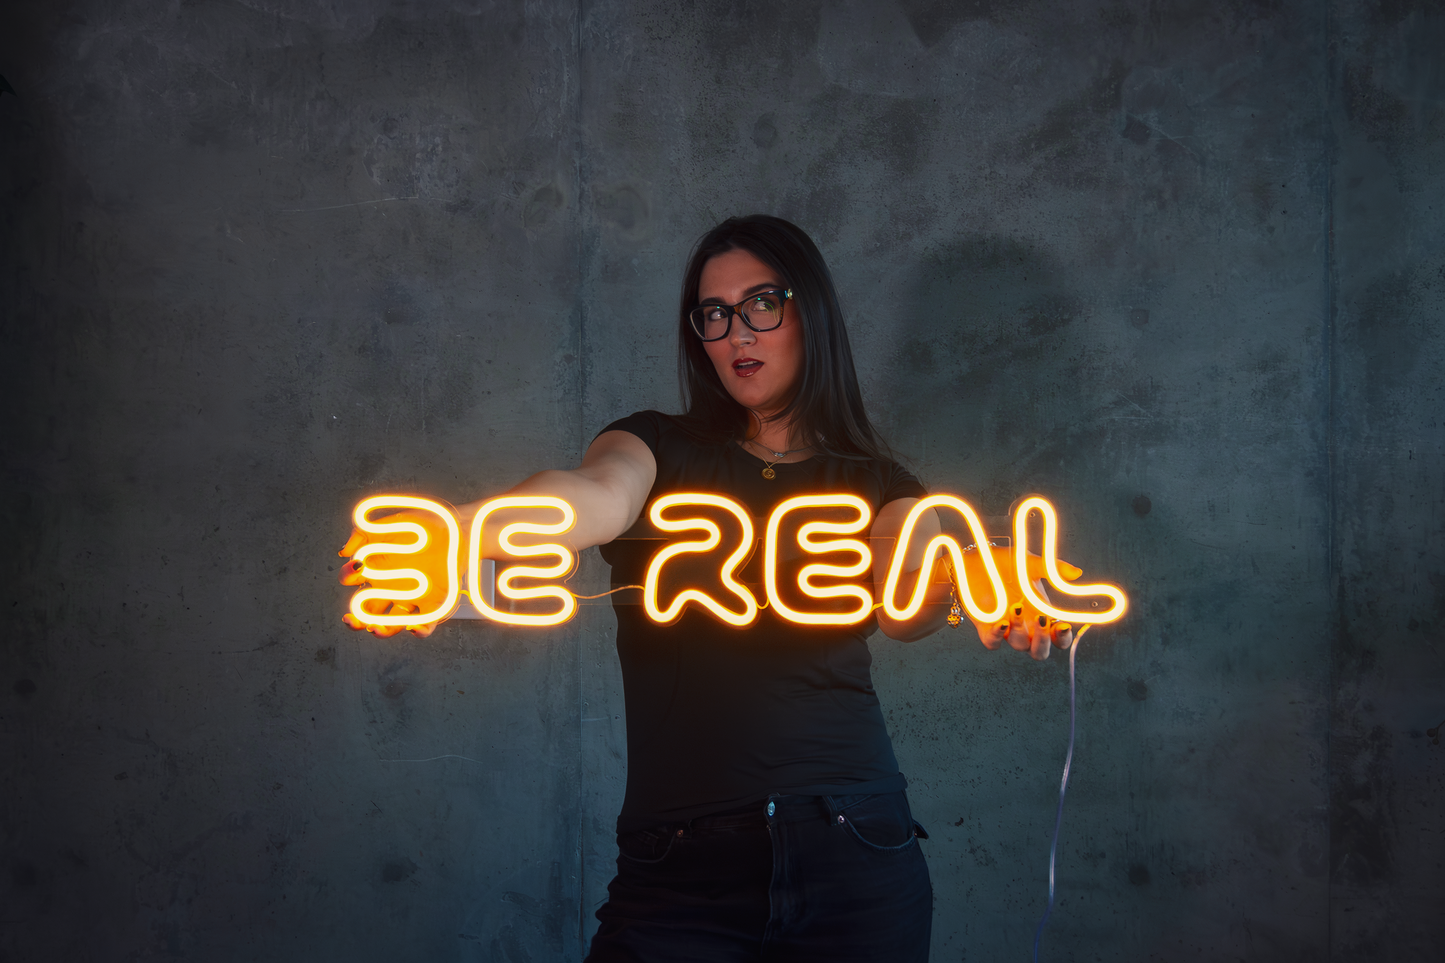 Girl holding a yellow neon sign that says "be real"